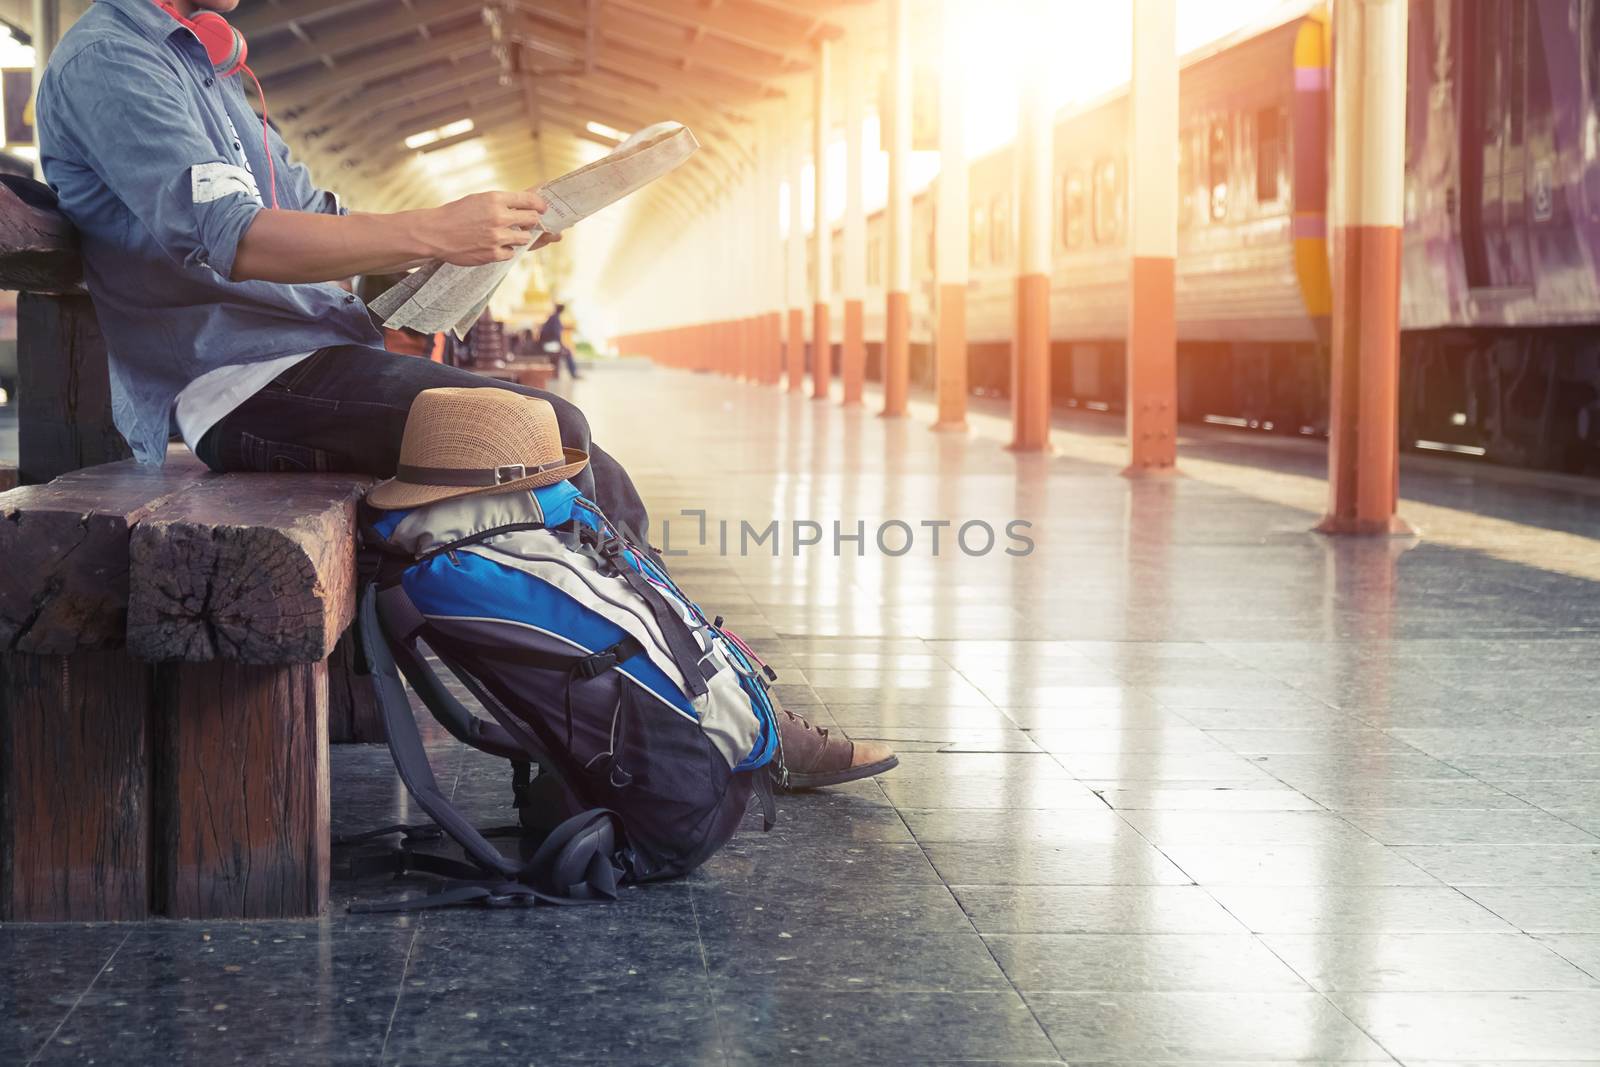 Backpacker at the train station with a traveler. Travel concept. by prathanchorruangsak